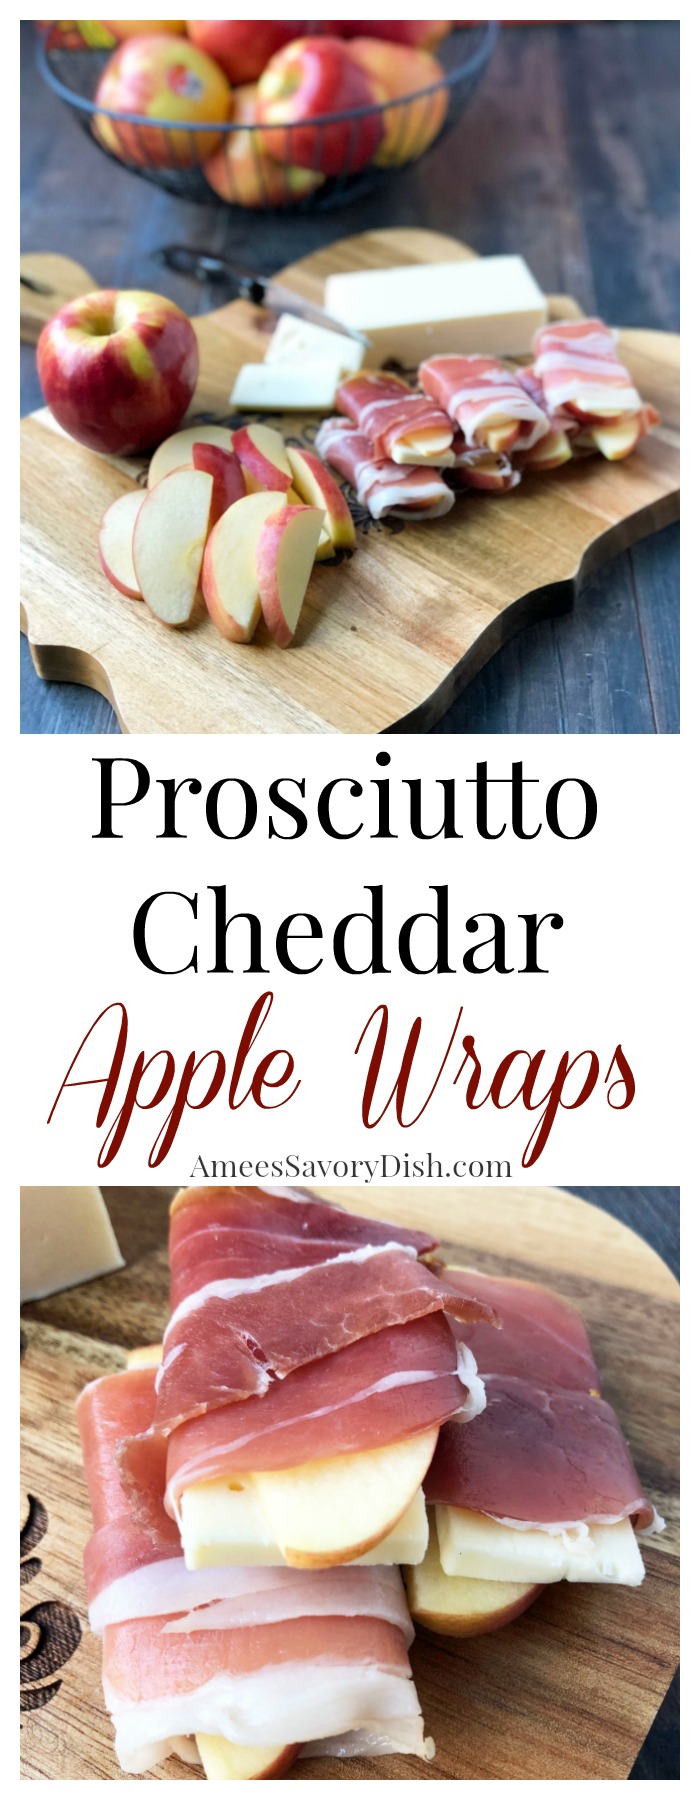 #Sponsored Prosciutto Cheddar Apple Wraps are a quick and easy high protein snack made with crisp and sweet Autumn Glory Apples, cheddar cheese and prosciutto ham. via @Ameessavorydish